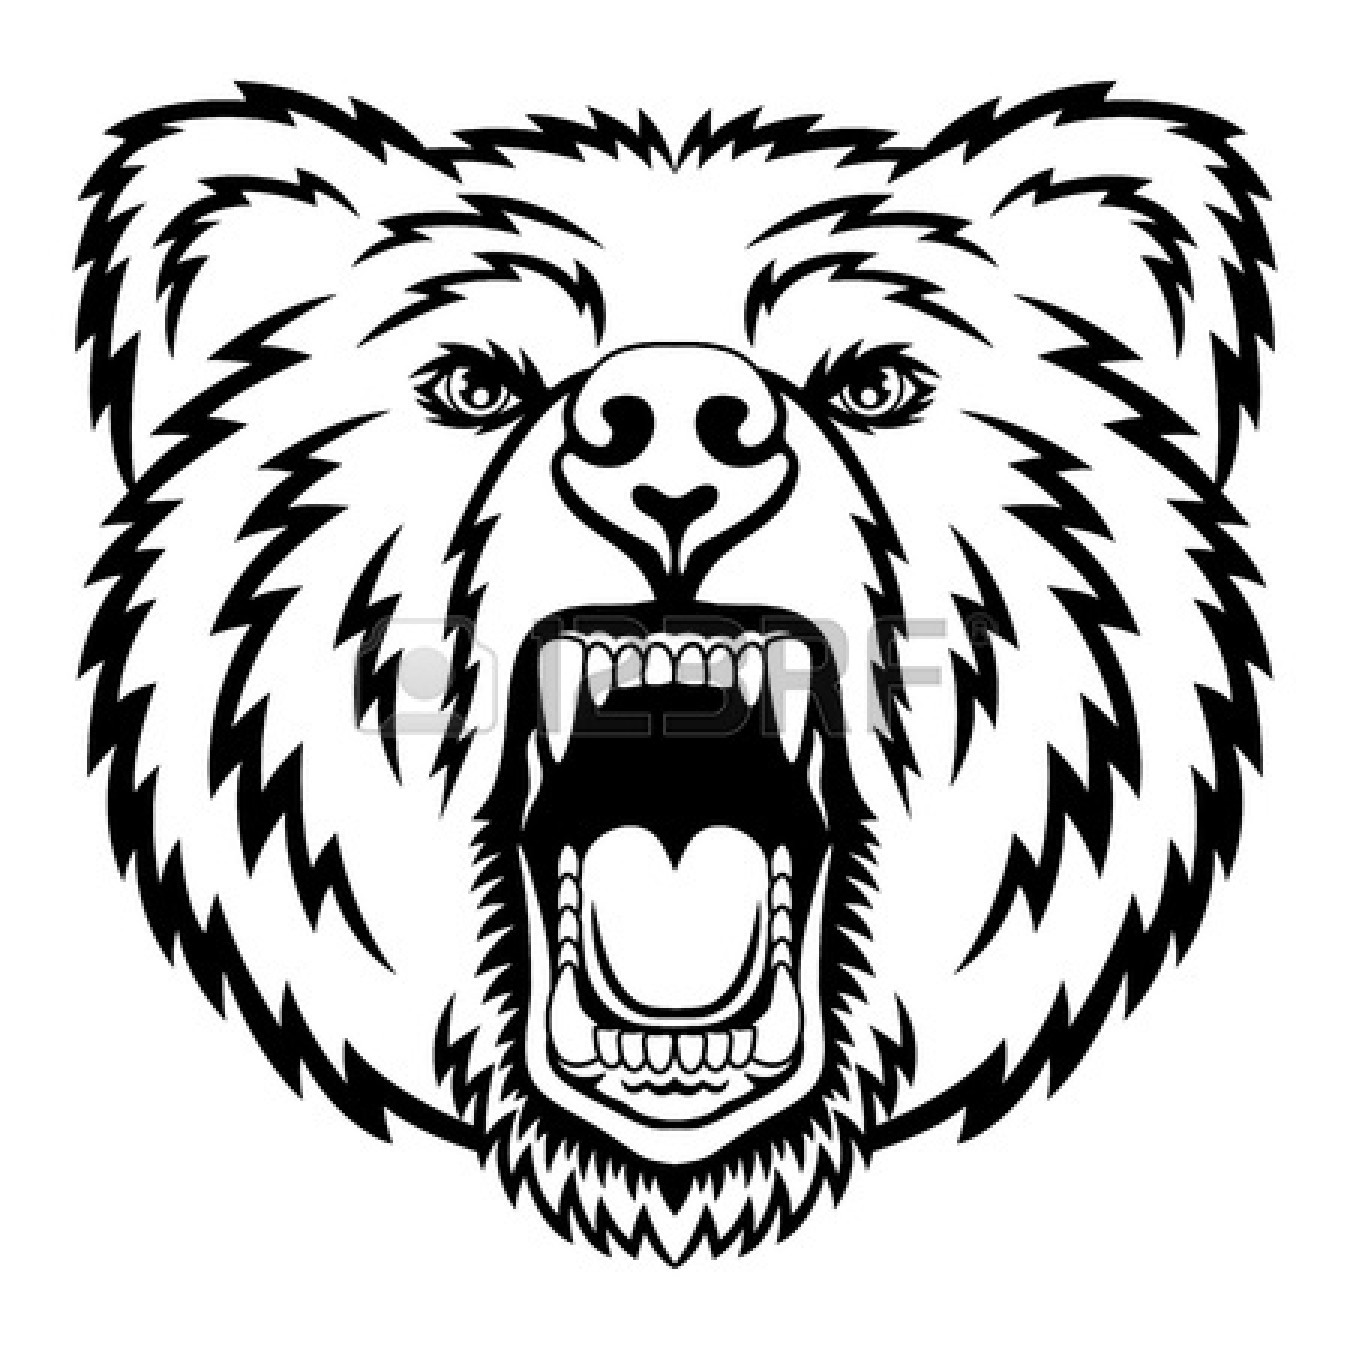 Standing Black Bear Drawing | Clipart Panda - Free Clipart Images